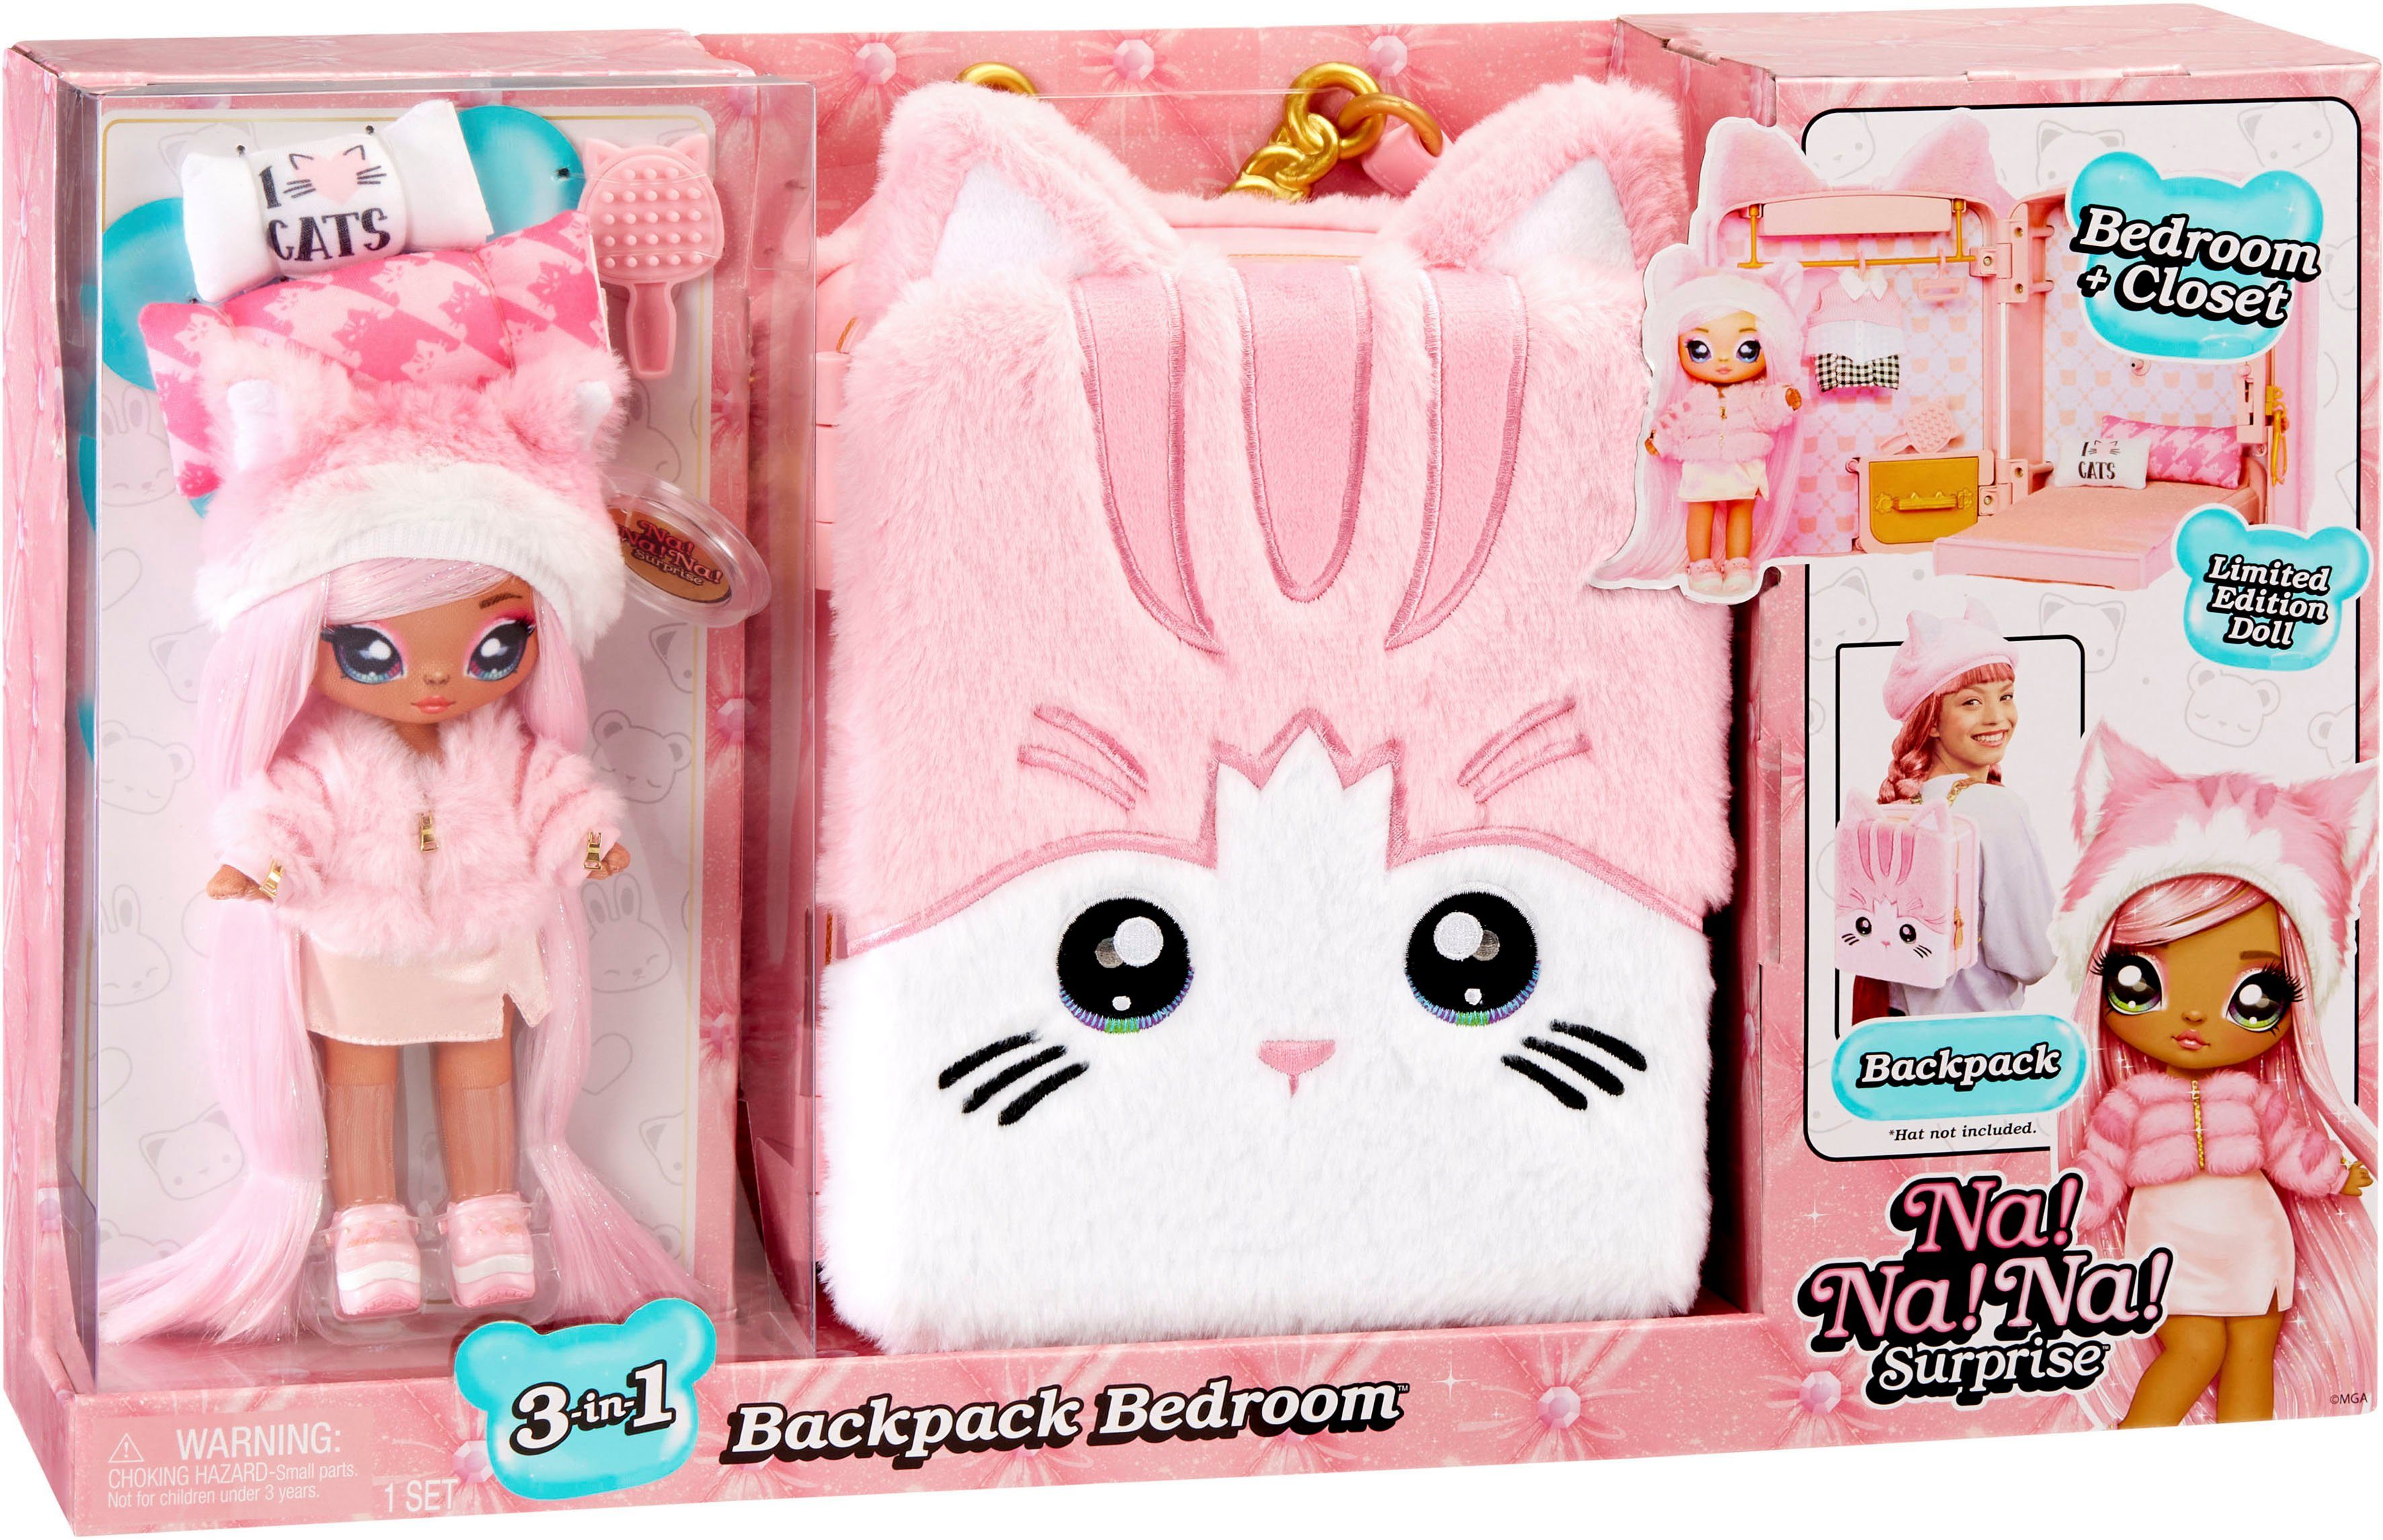 MGA ENTERTAINMENT Puppenmöbel 3-in-1 Backpack Bedroom Series 3 Playset - Pink Kitty, Na!Na!Na! Surprise